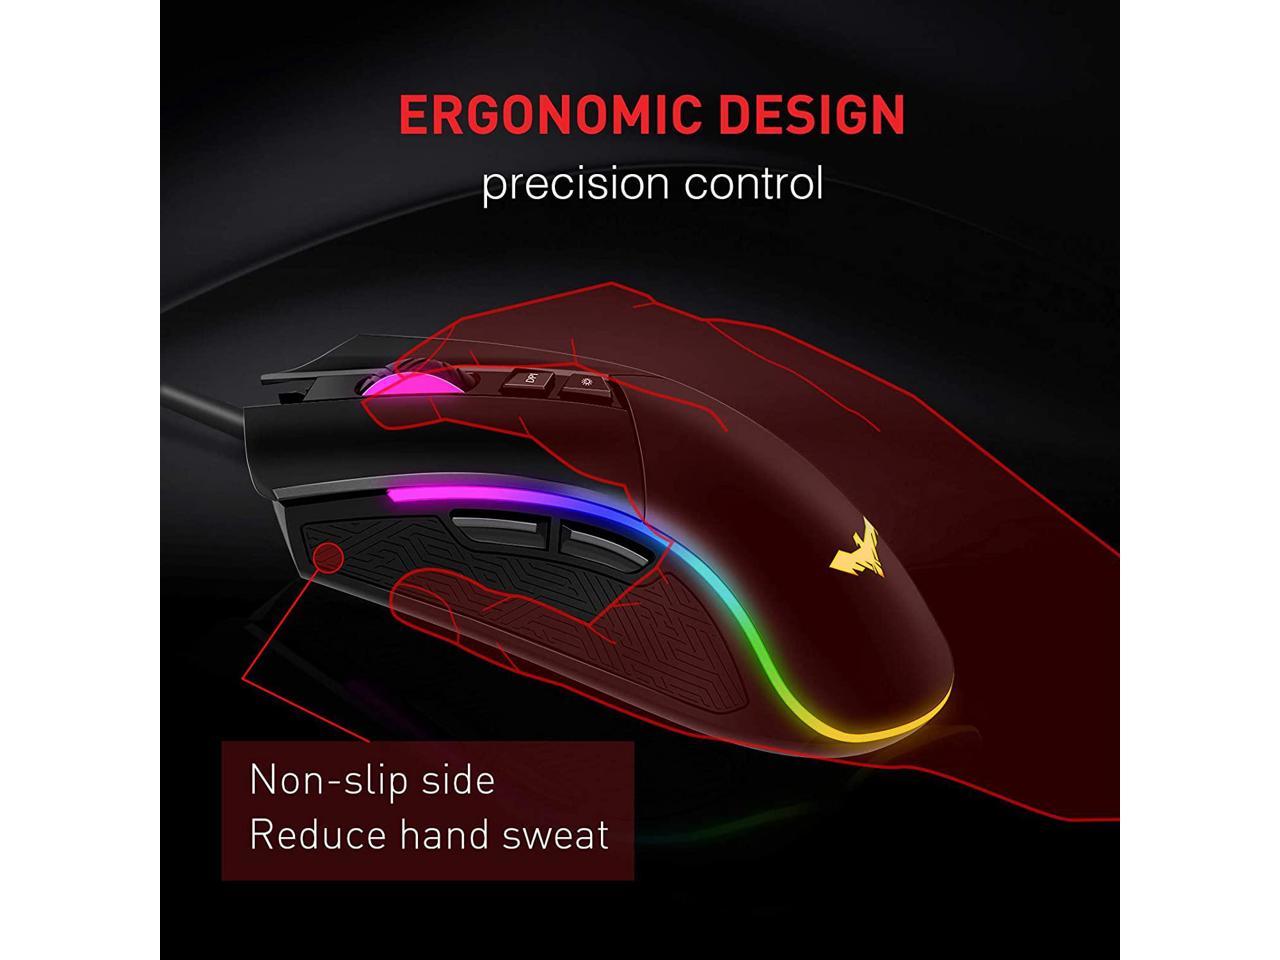 havit gaming mouse double clicks instead of clicks